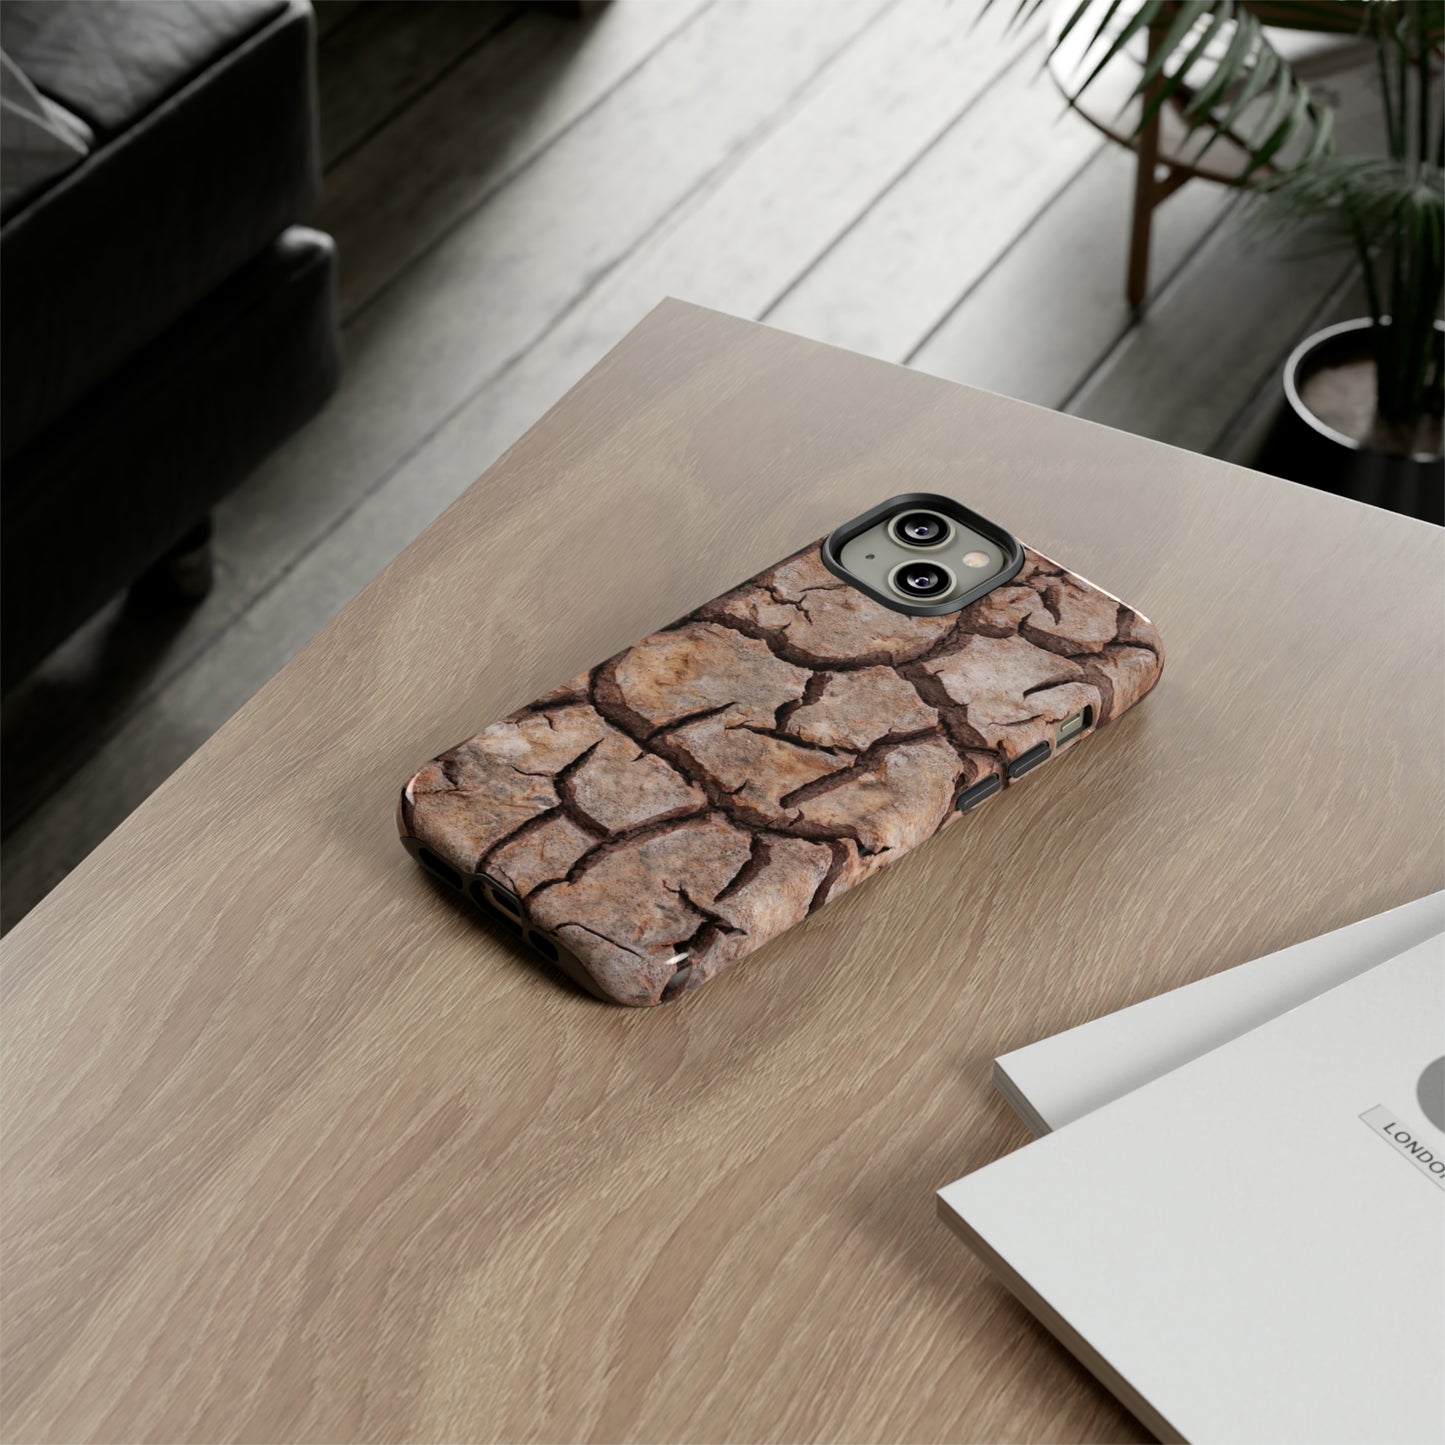 Cracked Earth Phone Case